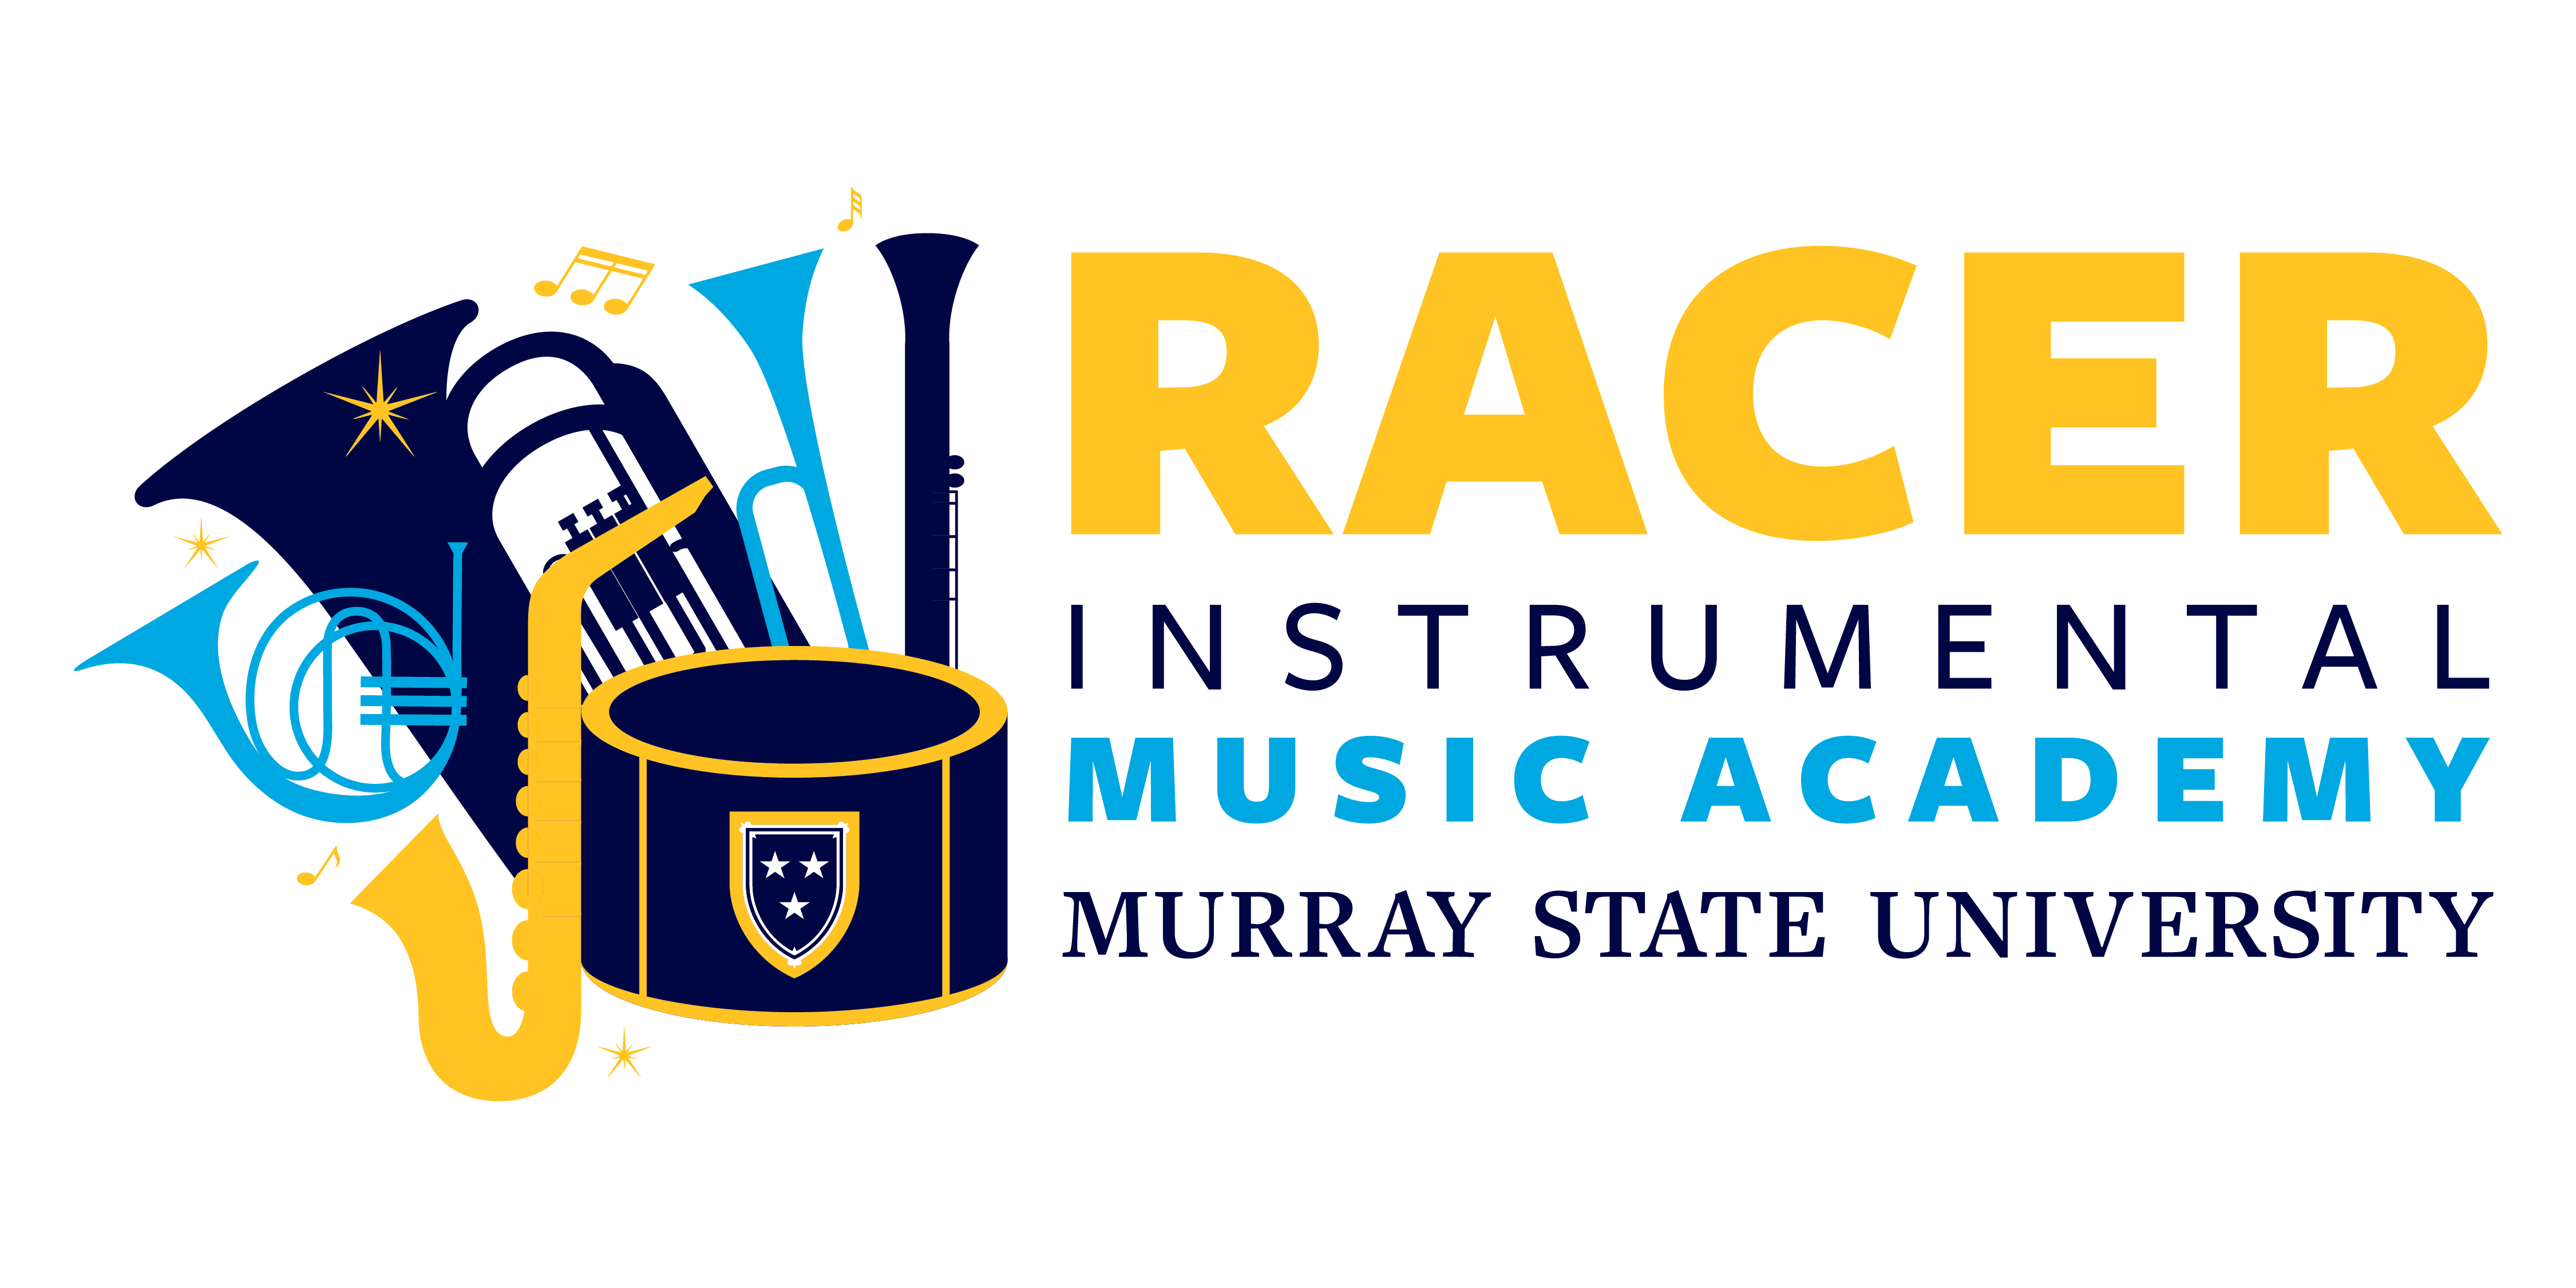 Racer Instrumental Music Academy logo with musical instruments in MSU colors